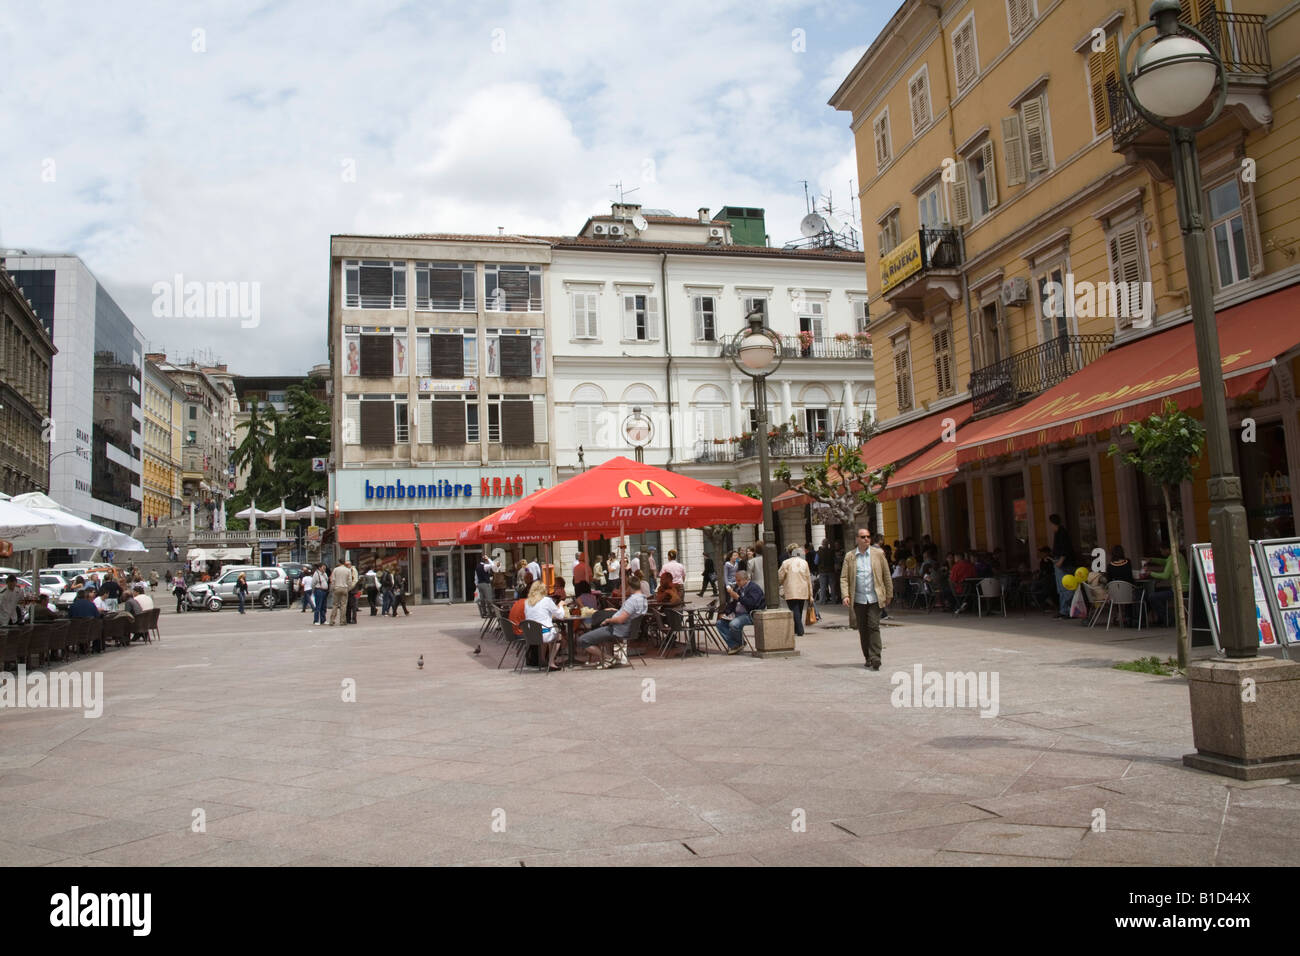 Rijeka Istria Croatia Europe May People dining out at the McDonalds restaurant in a square off Korzo Street in city centre Stock Photo